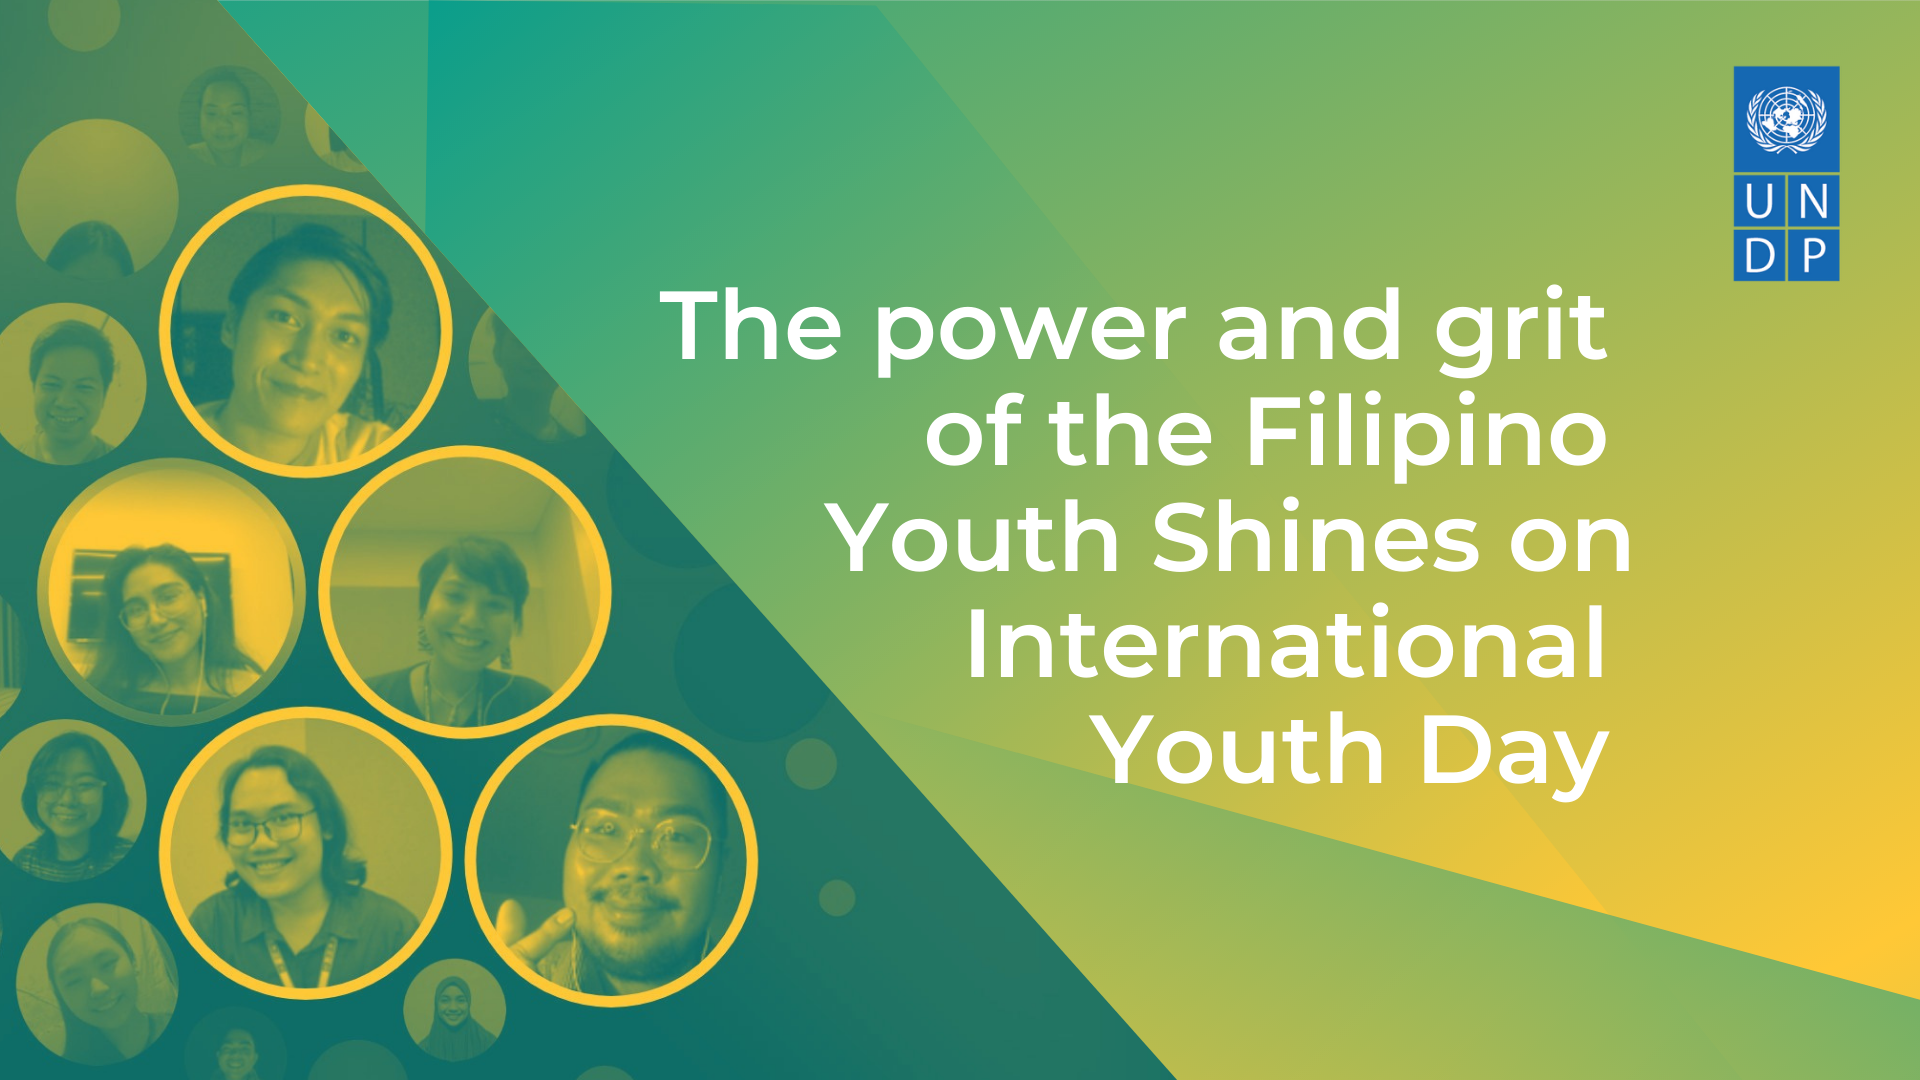 The power and grit of the Filipino Youth Shines on International Youth Day | United Nations Development Programme